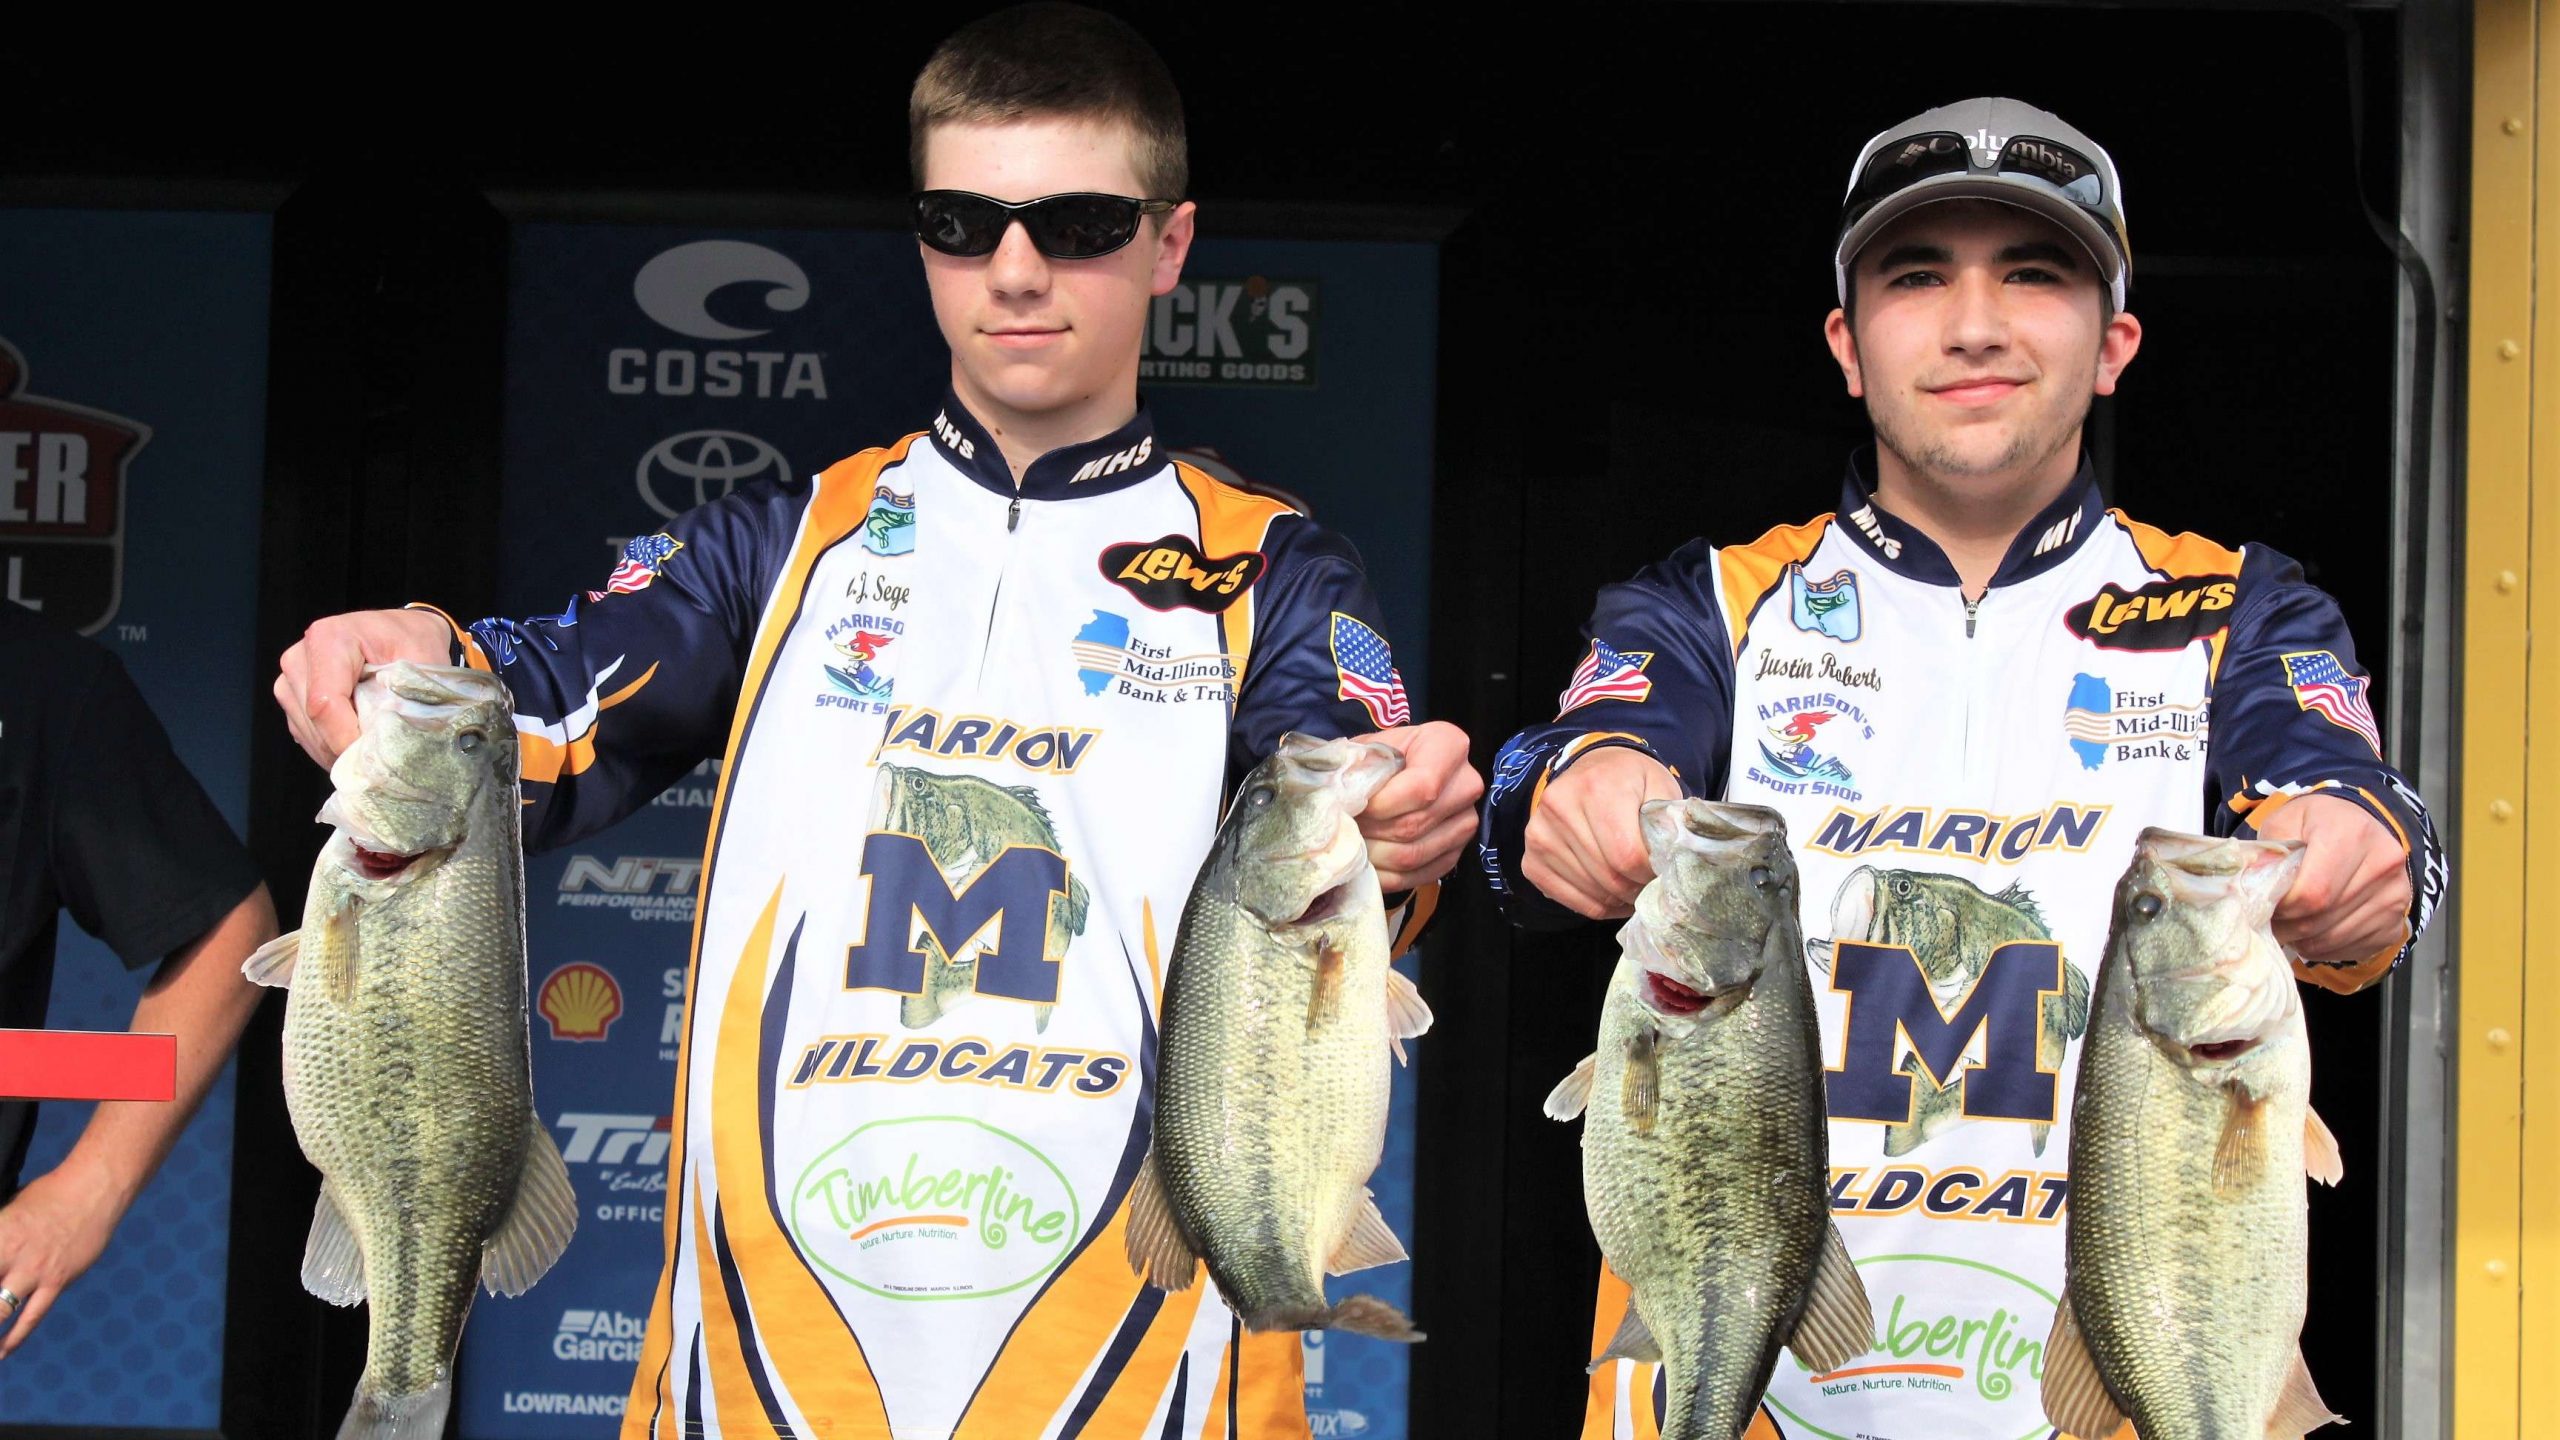 Justin Roberts and A.J. Seghers of the Marion (Ill.) High team placed ninth with 12-2.